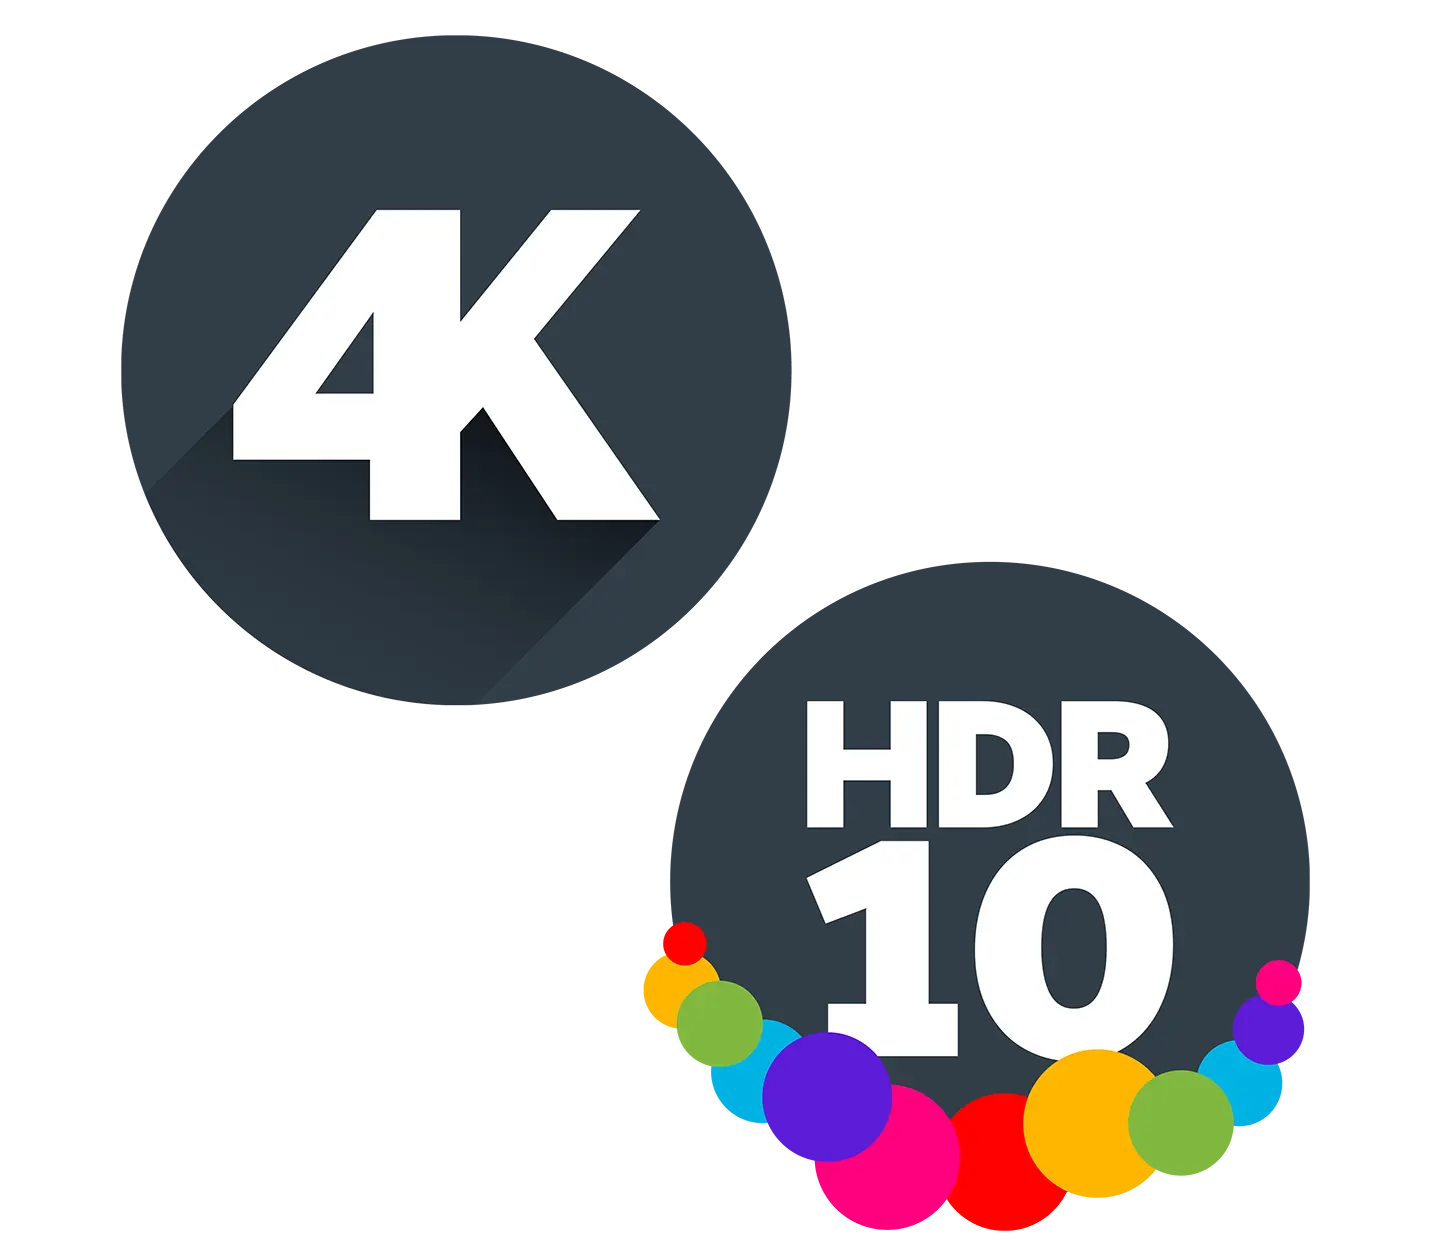 4K and HDR10